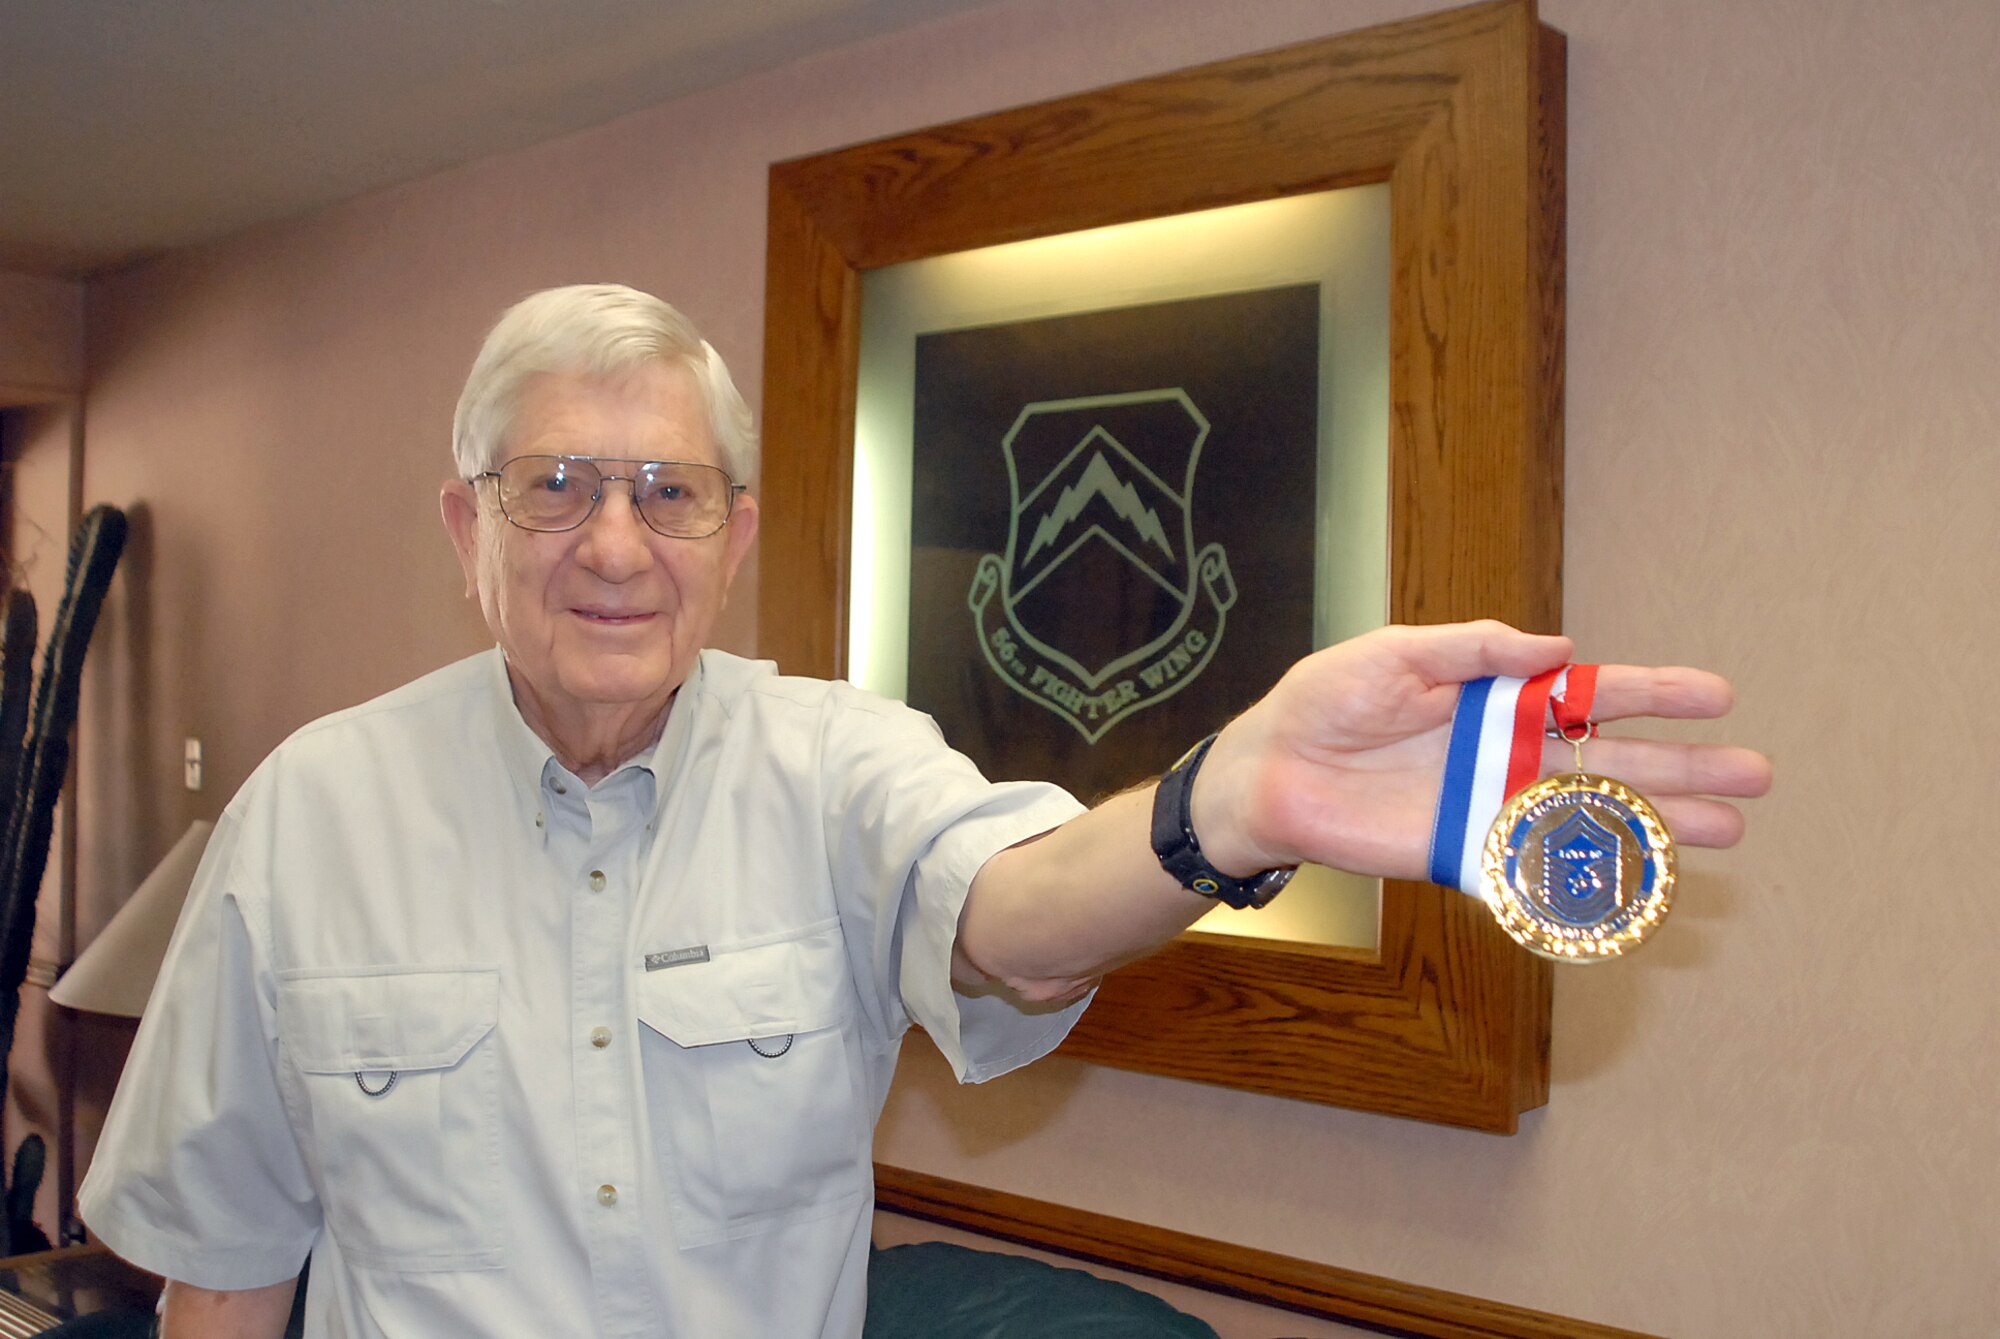 Retired Chief Master Sgt. Wallace Liggett, one of the first-ever chief master sergeants in the Air Force, shows off his Charter Chief medallion which was presented to him after being inducted into the Air Force Heritage Hall of Fame. (photo by 2nd Lt. Bryan Bouchard)